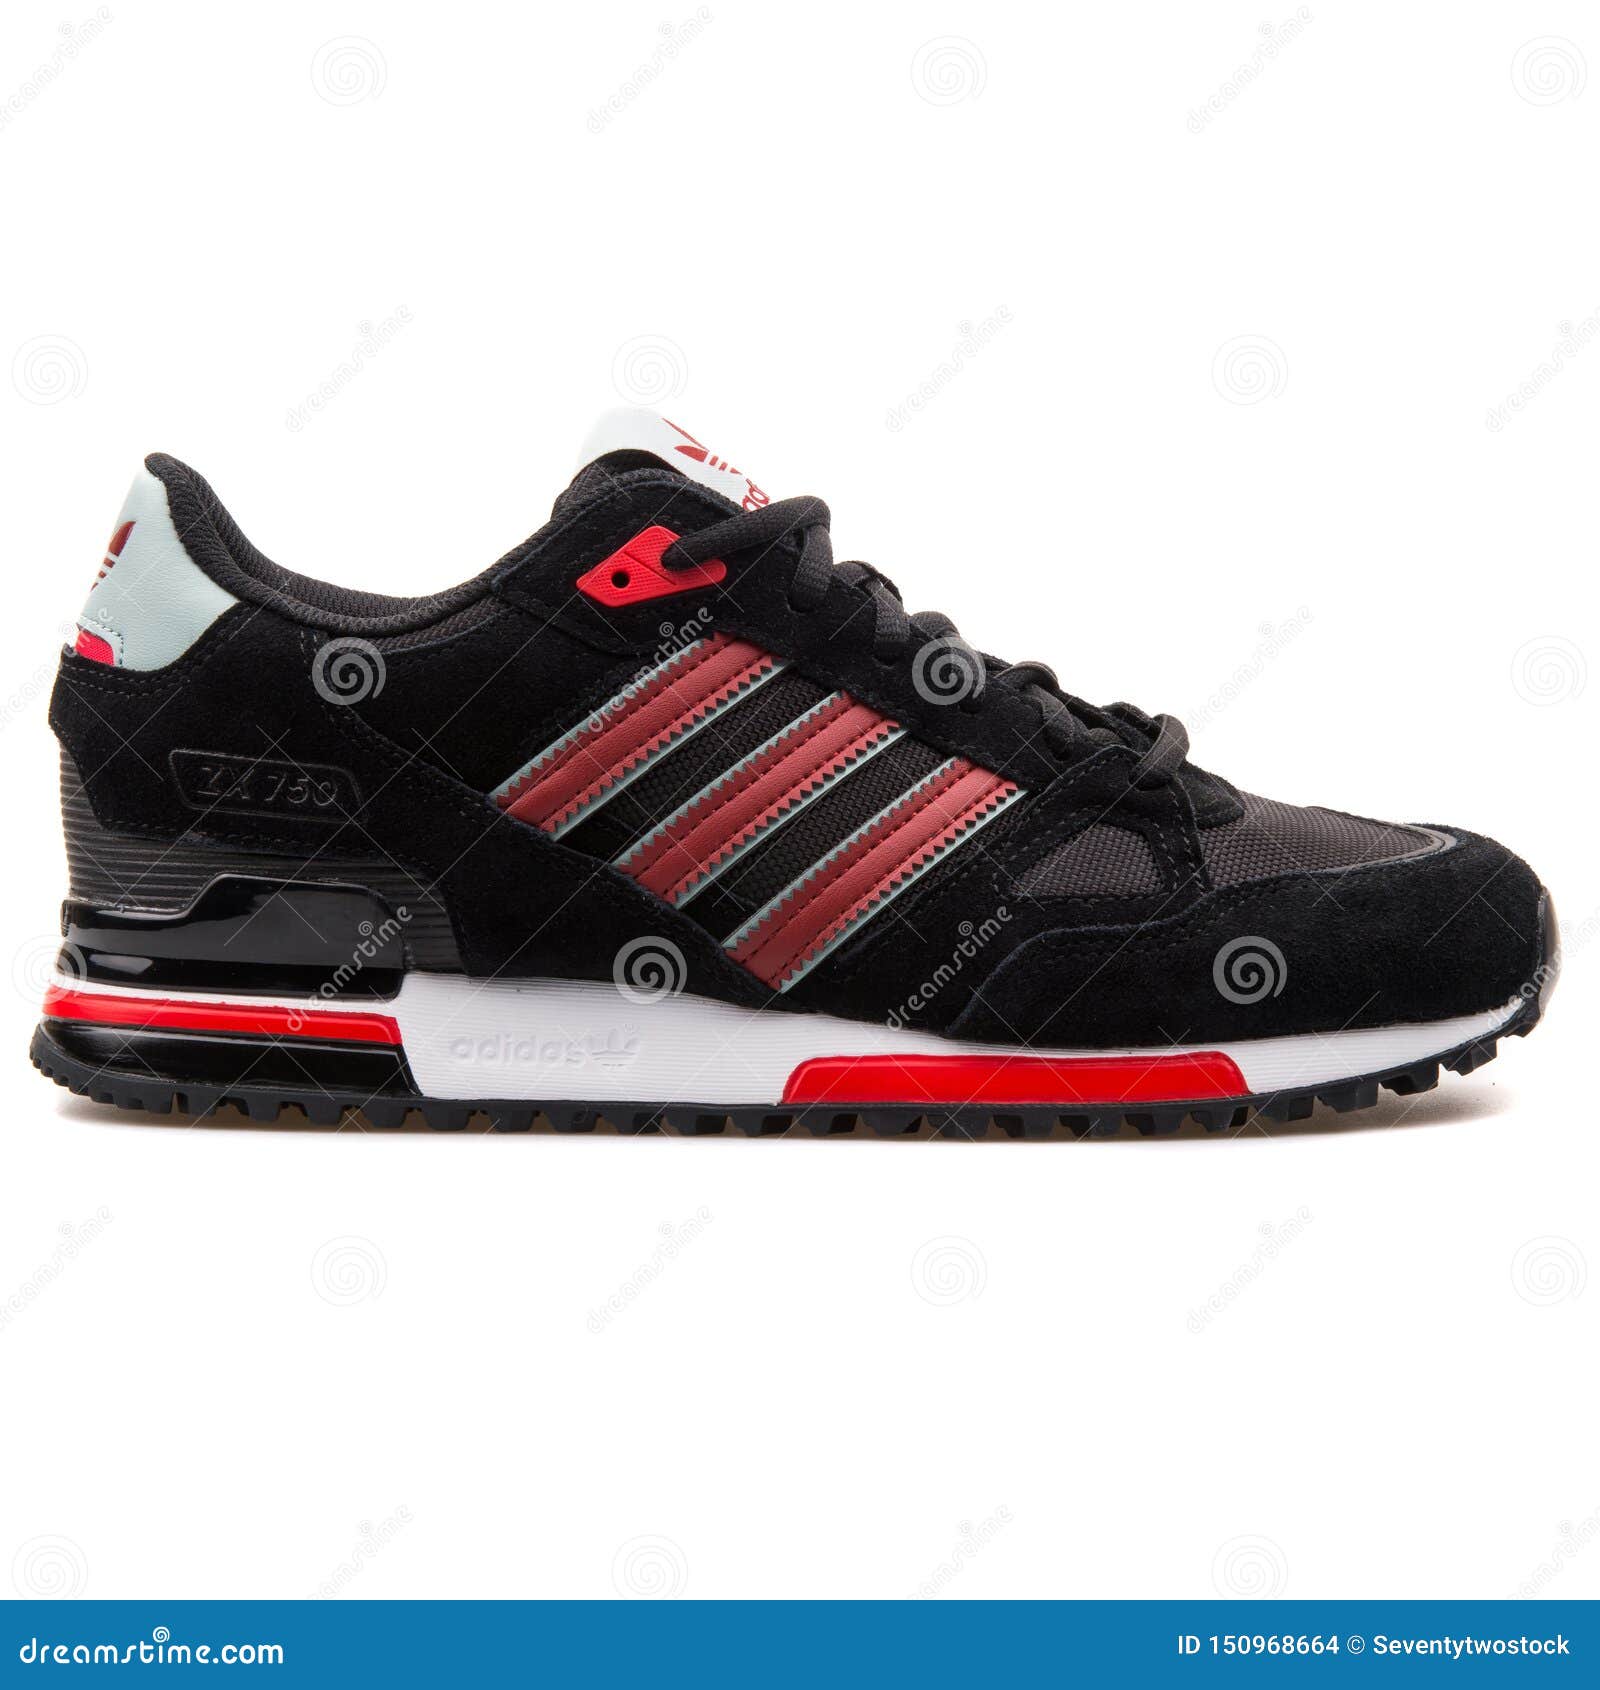 barbering Emuler godtgørelse Adidas ZX 750 Black and Red Sneaker Editorial Stock Image - Image of  sneakers, athletic: 150968664